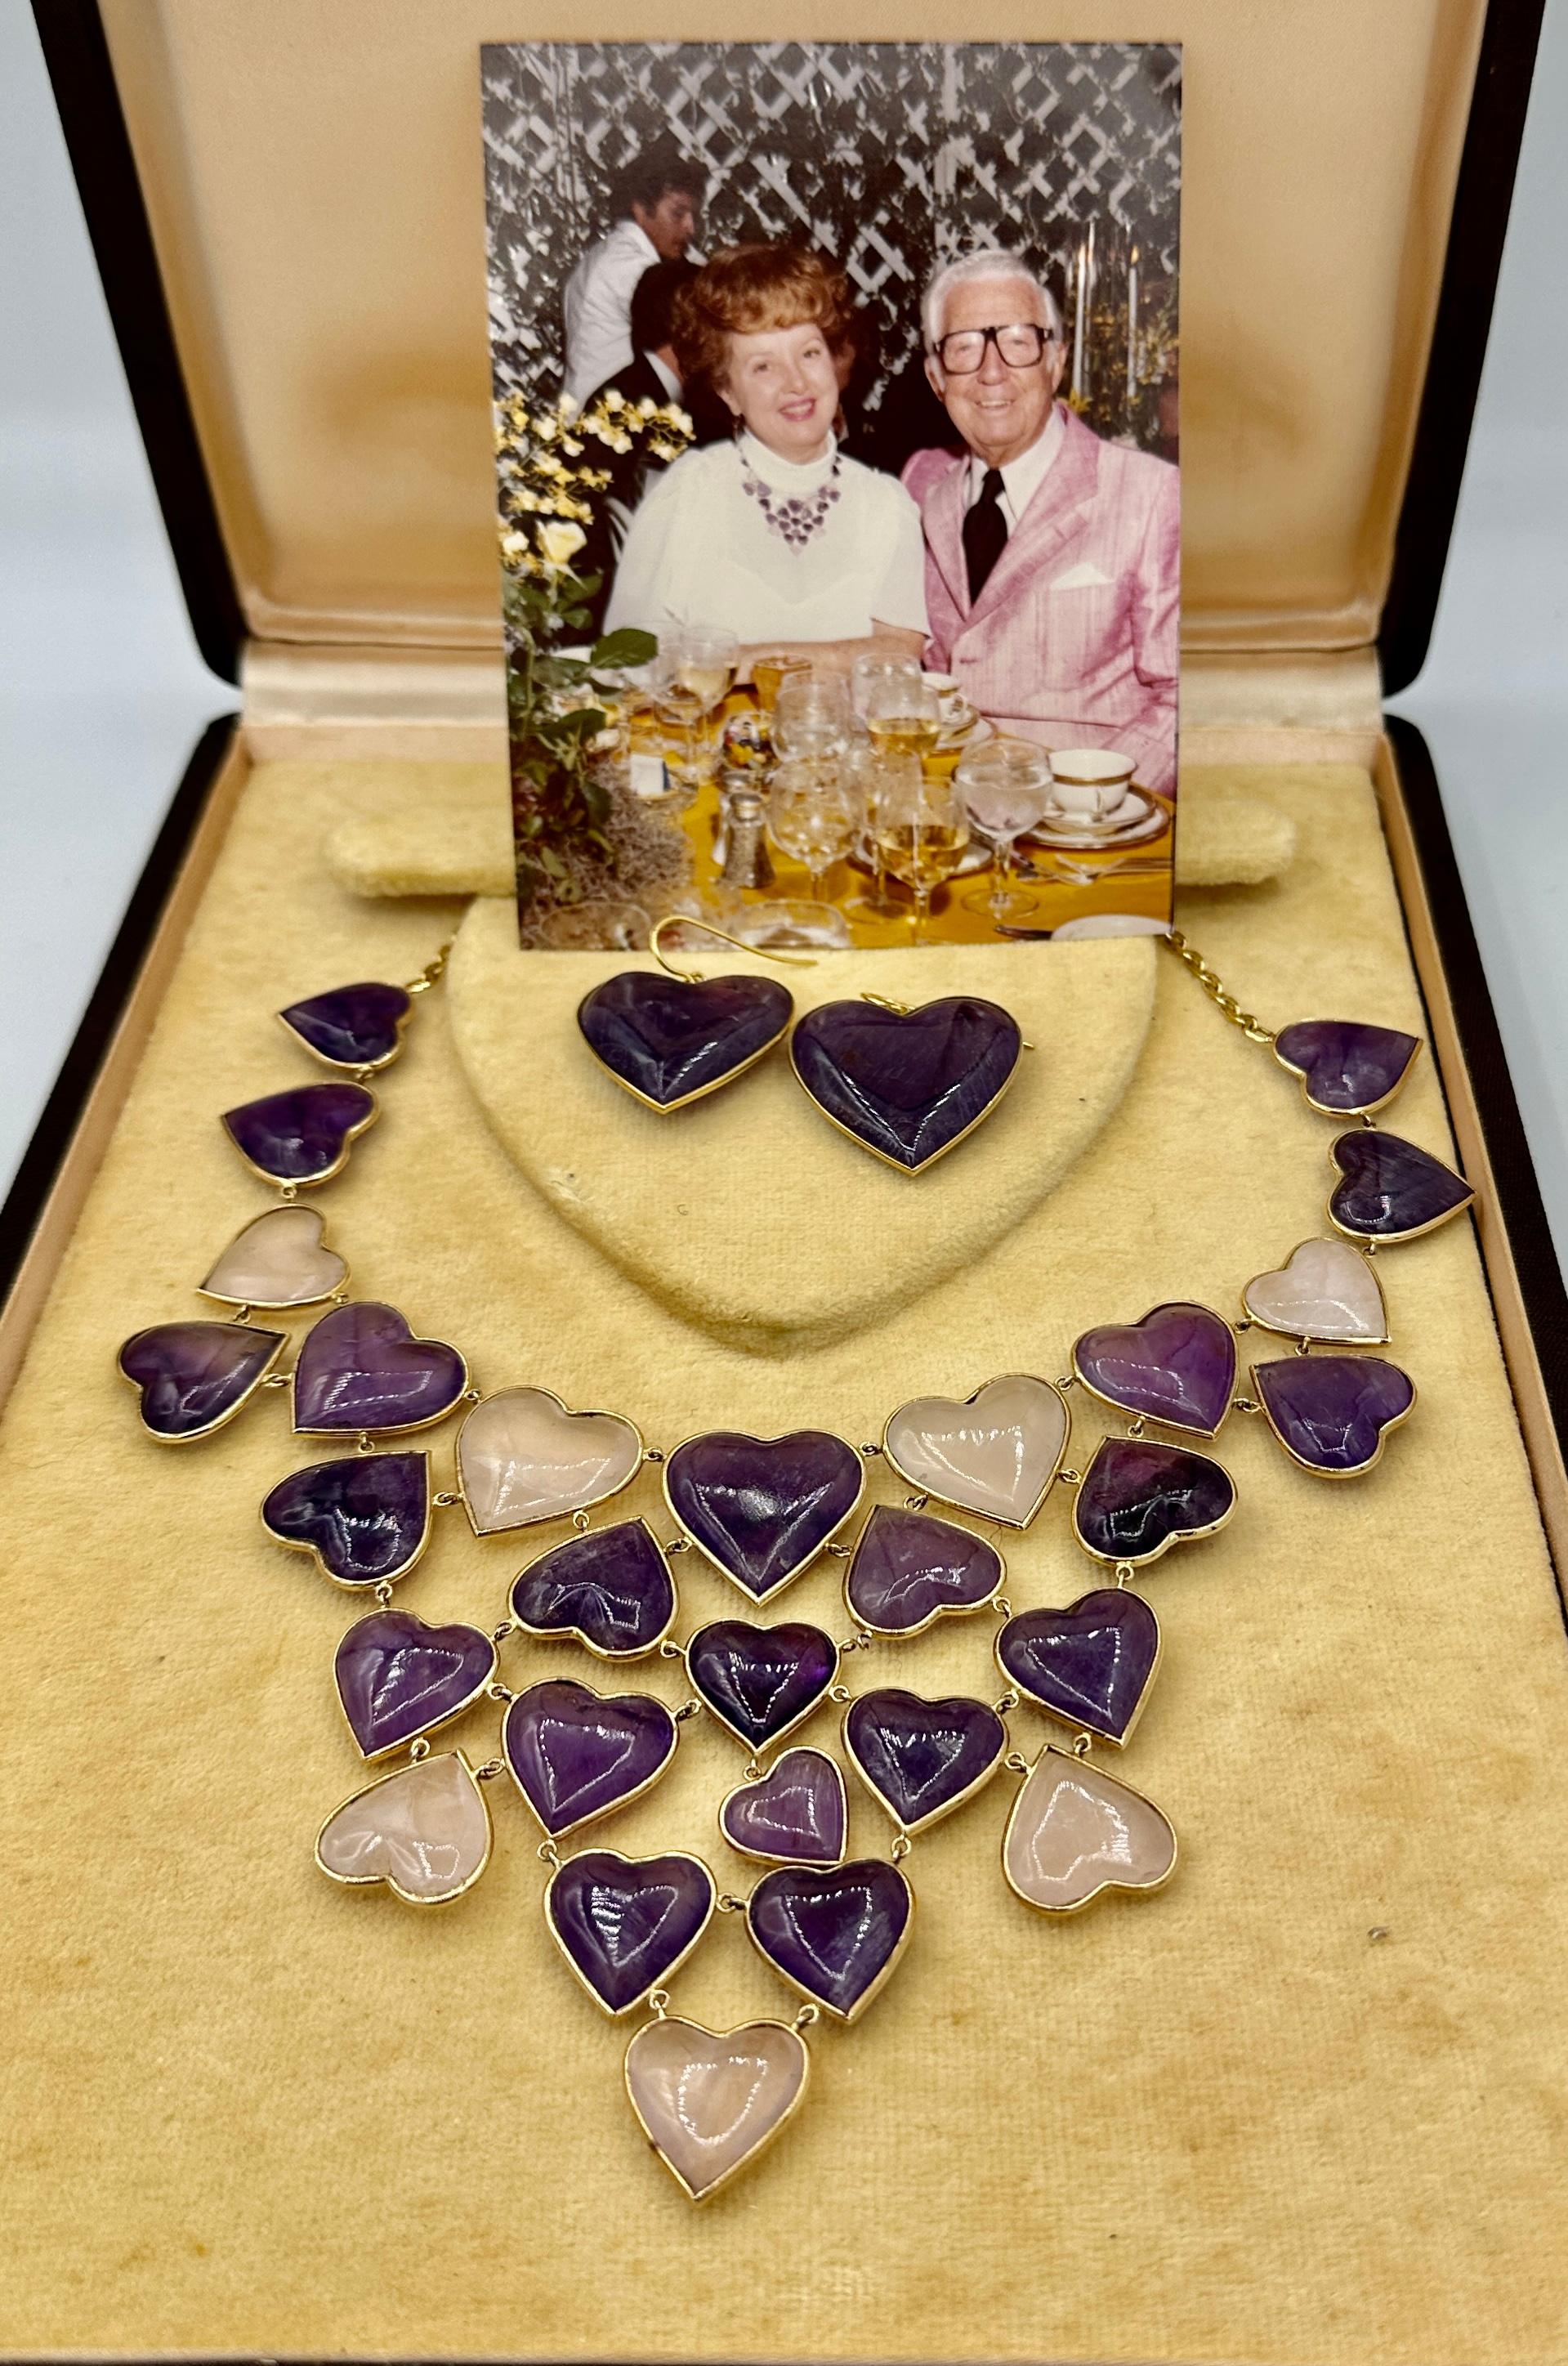 Amethyst Rose Quartz Heart Necklace and Earrings 14 Karat Gold Ms. Daves Estate In Excellent Condition For Sale In New York, NY